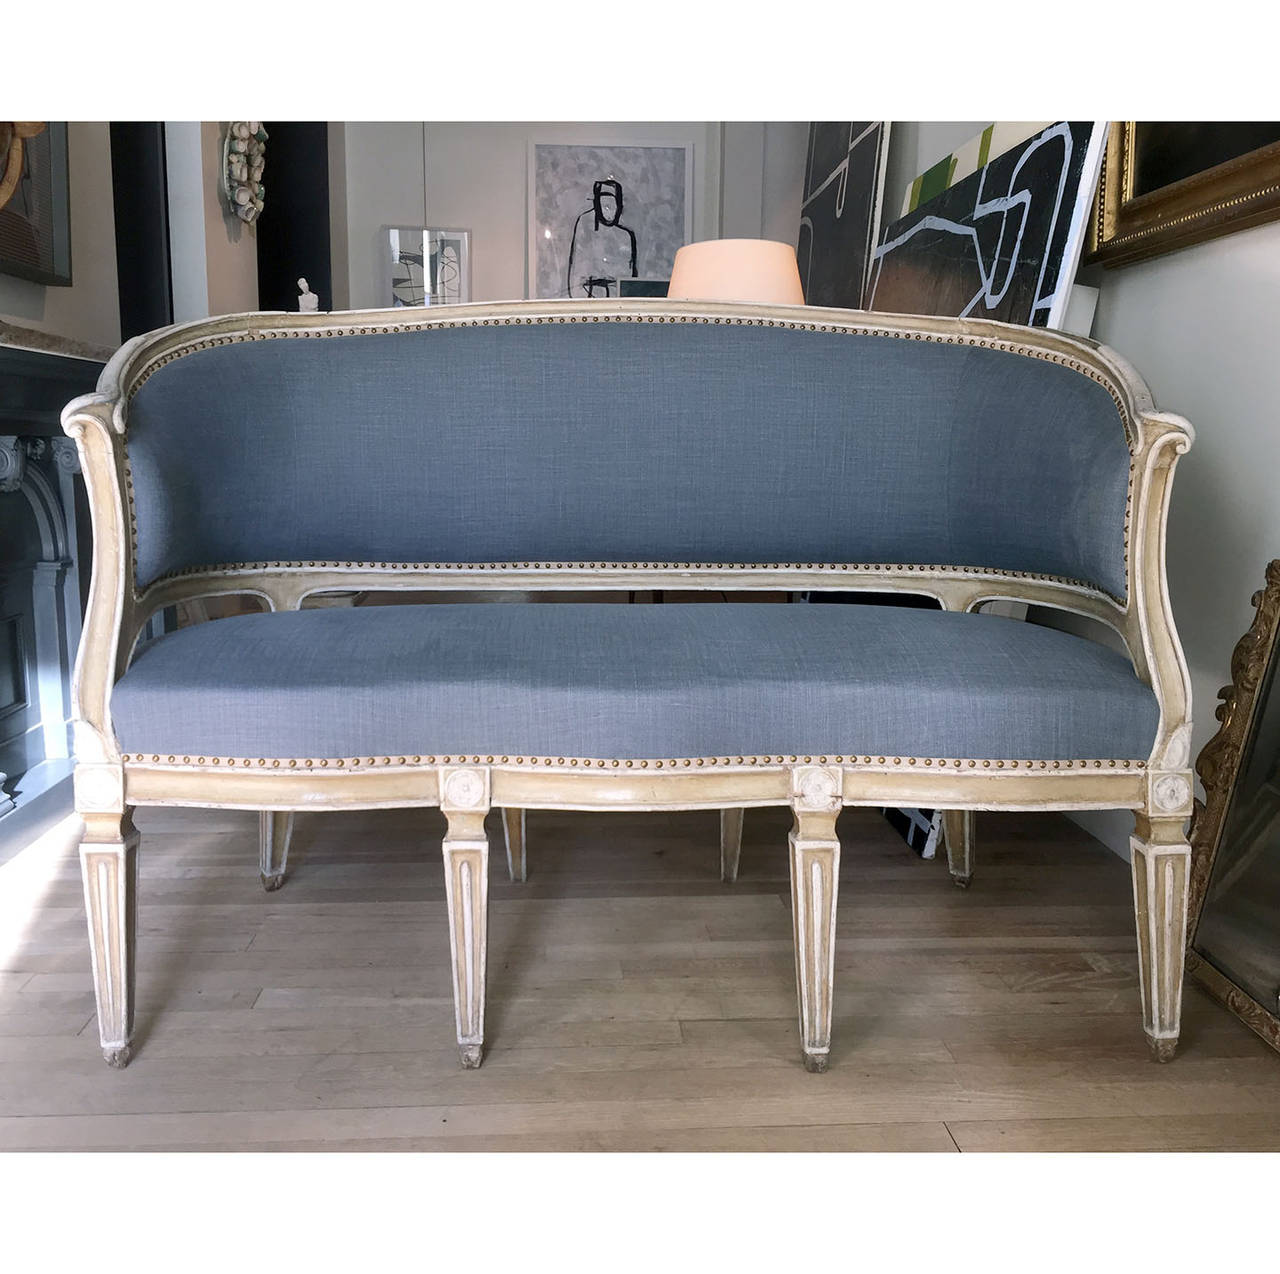 Louis XVI Painted Canape now with blue/grey linen upholstery.